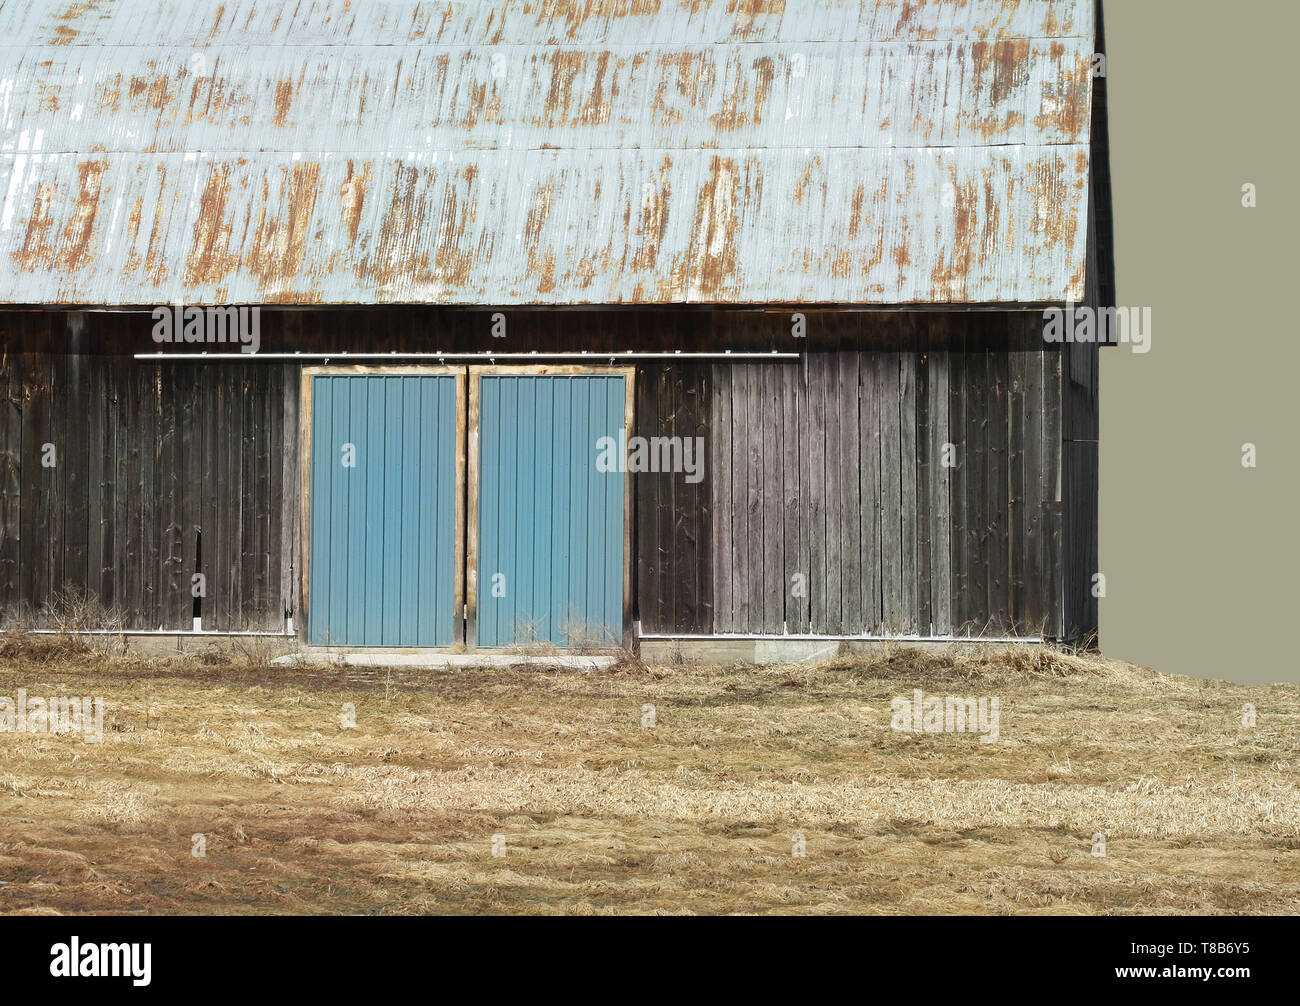 Old worn barn with added abstract color Stock Photo